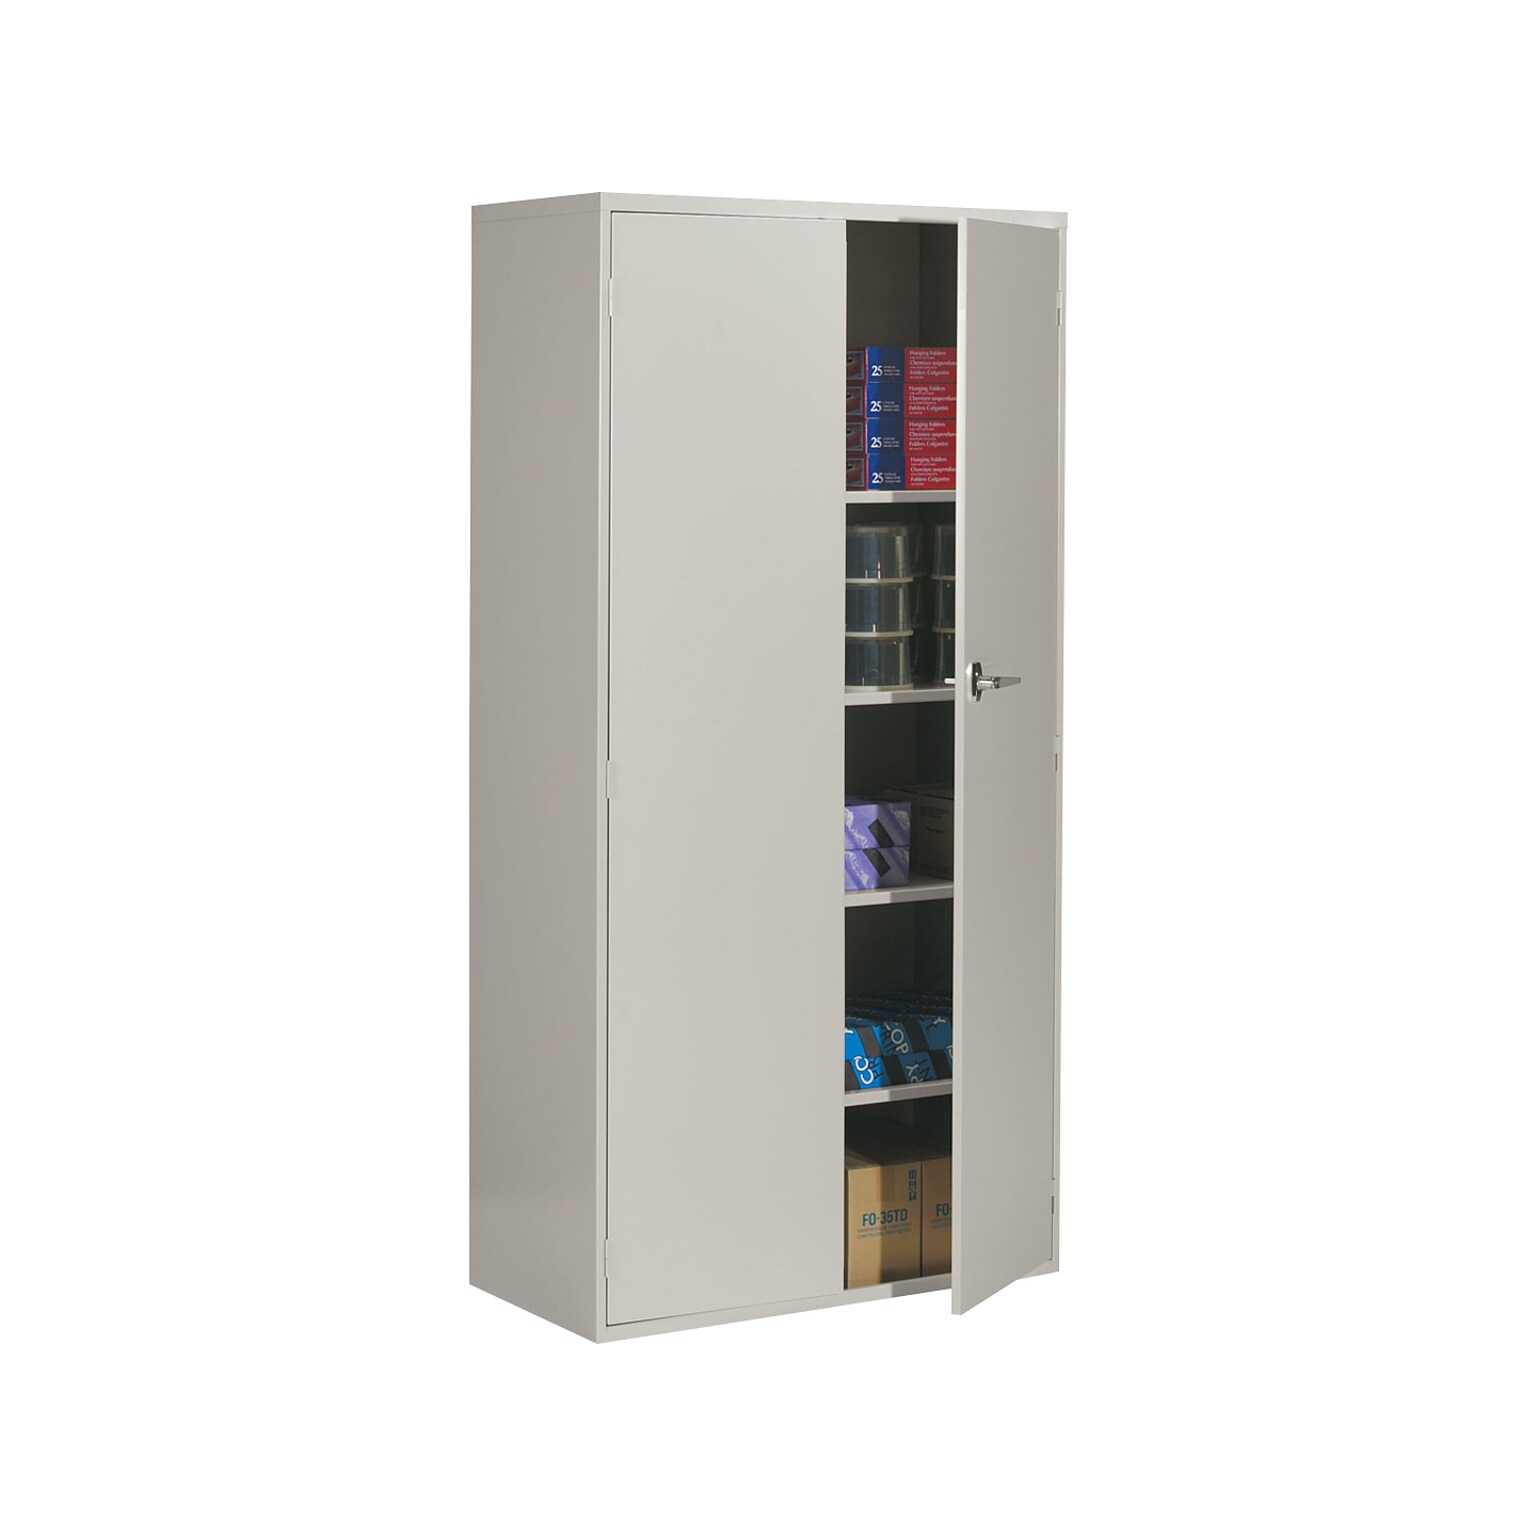 Global 9300 72 Steel Storage Cabinet with Four Shelves, Light Gray (9336-S72L-LGR)